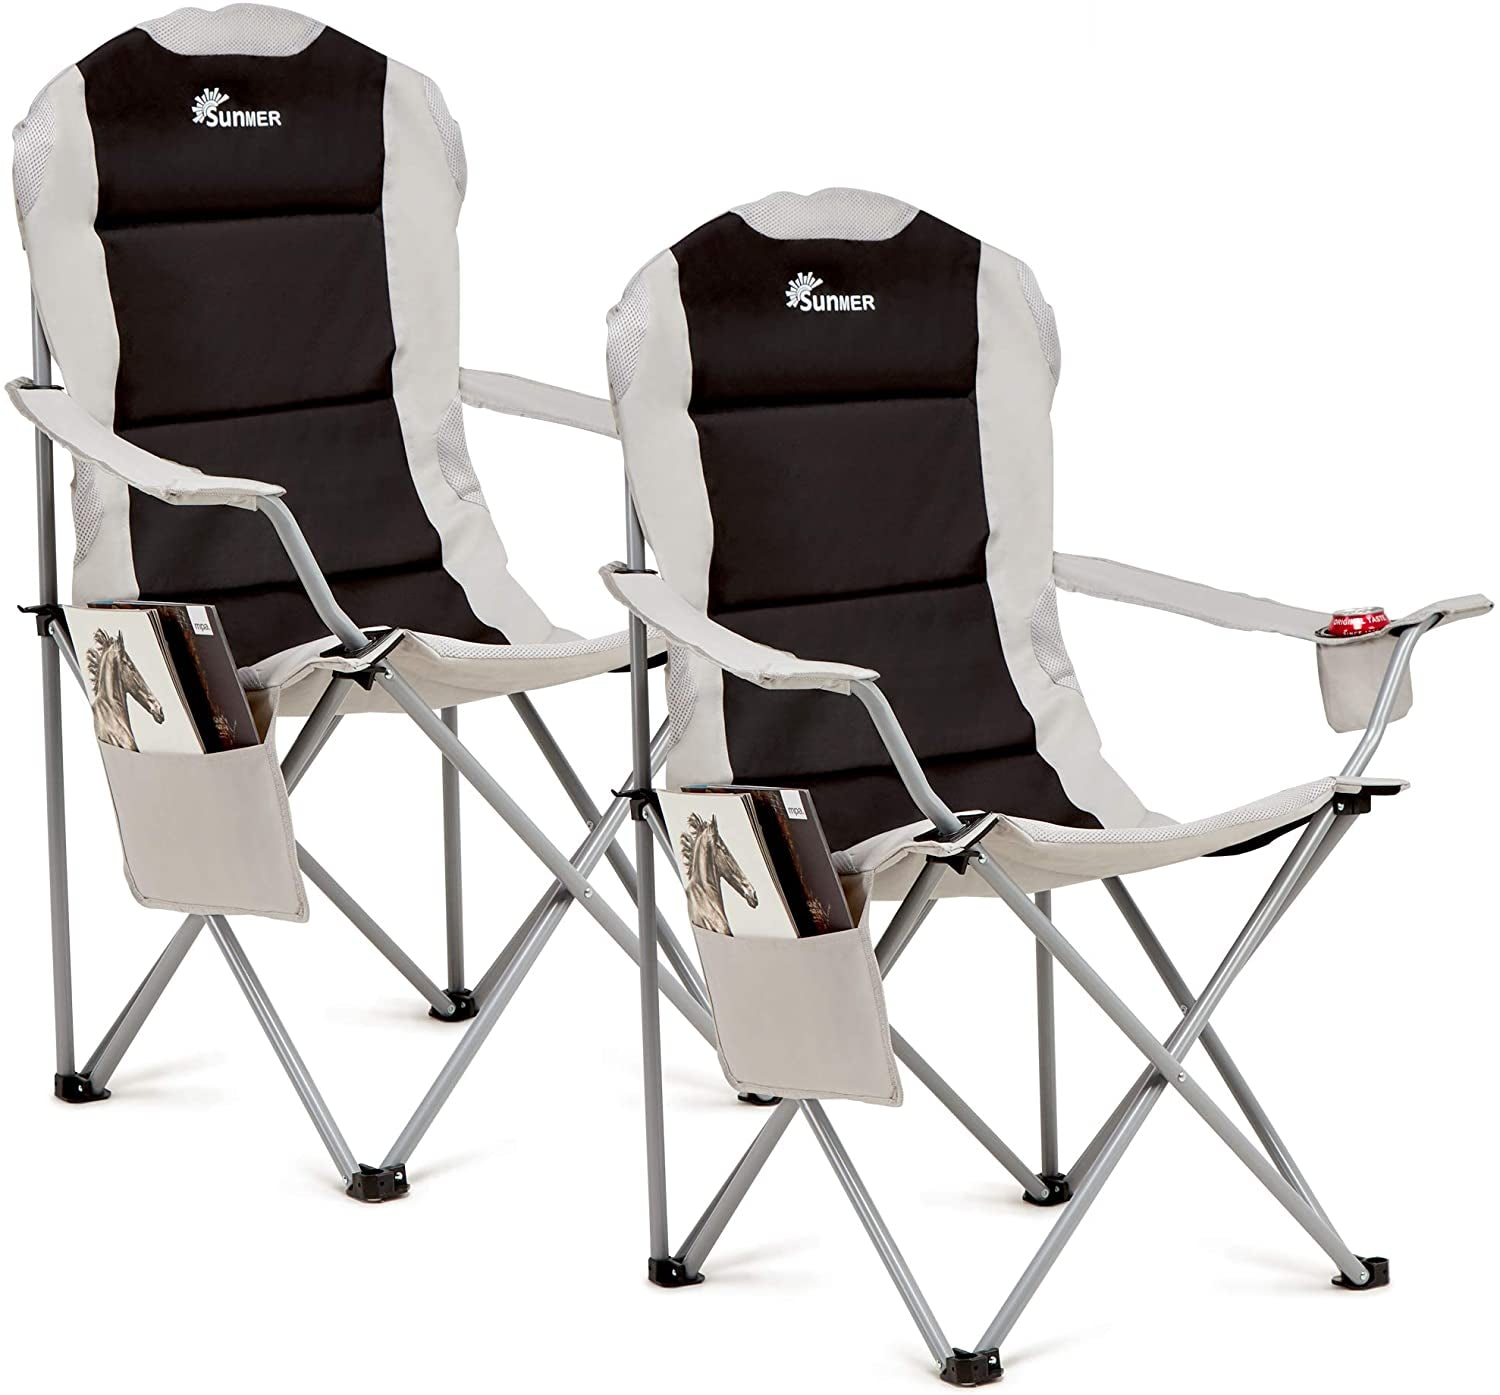 Padded Camping Chairs - Set of 2 Deluxe Folding Chairs with Cup Holder and Side Pockets, Holds up to 120Kg - Lightweight 3.3Kg per Chair - Black & Grey